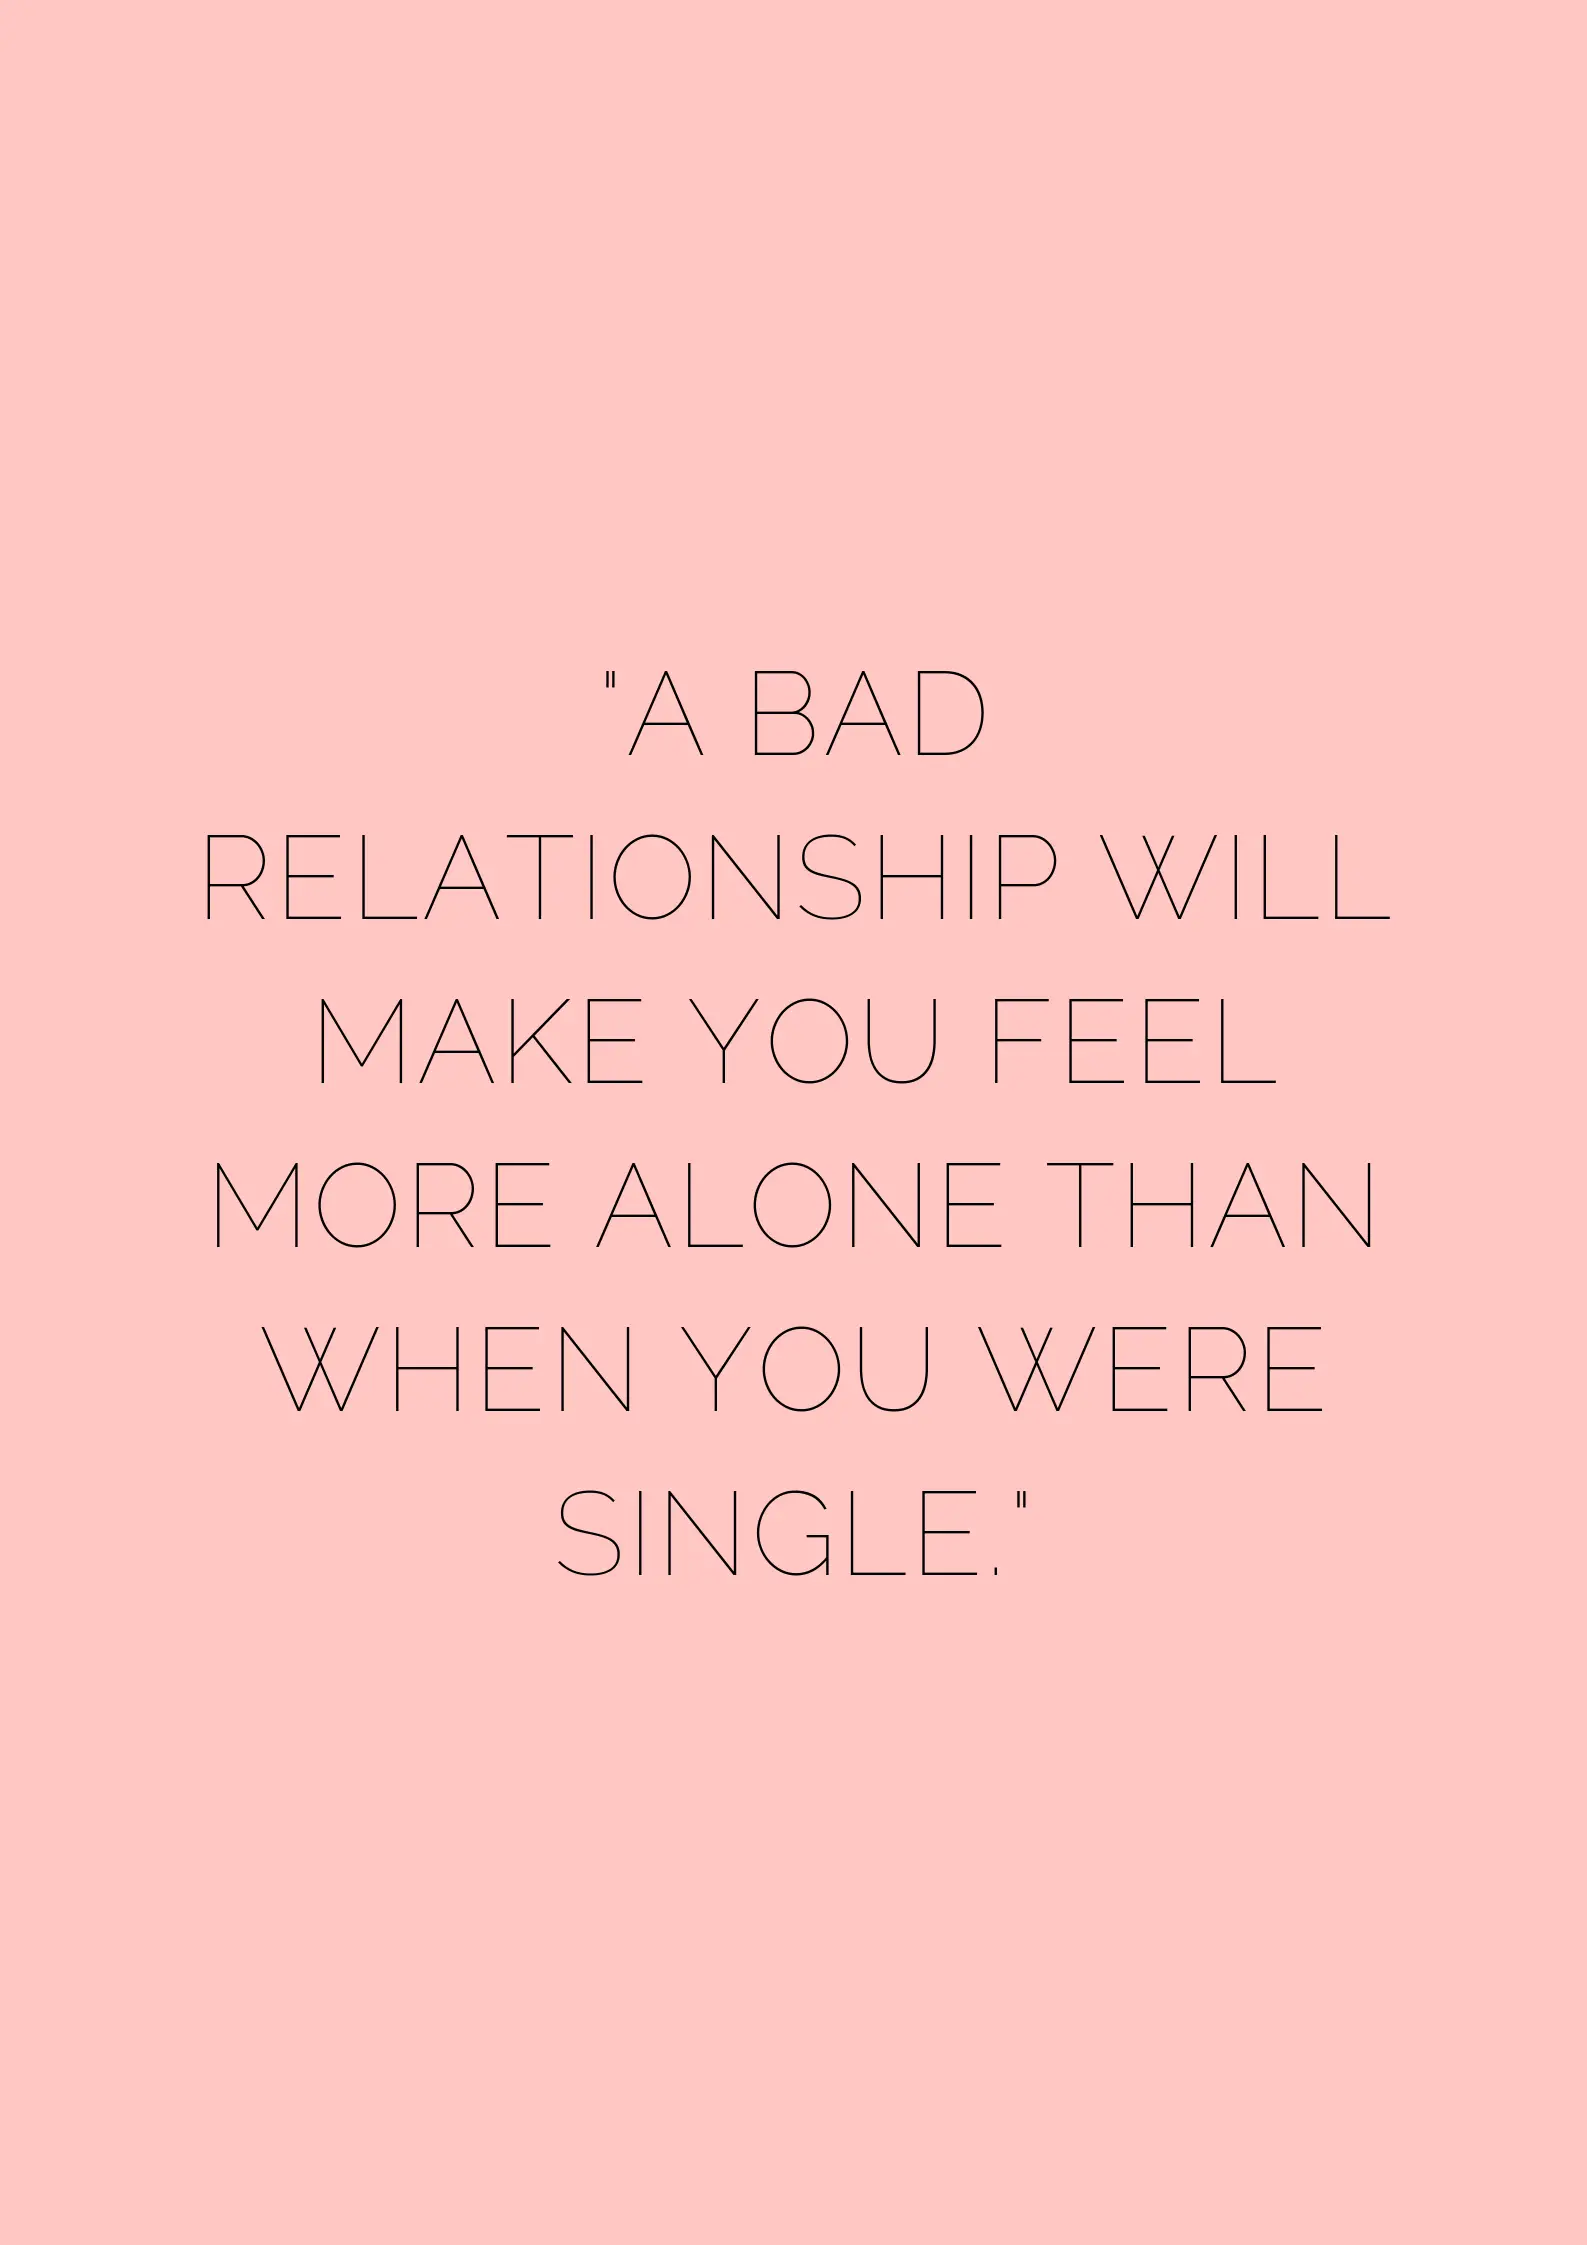 22 Empowering Quotes That Will Make You Want To Stay Single - museuly